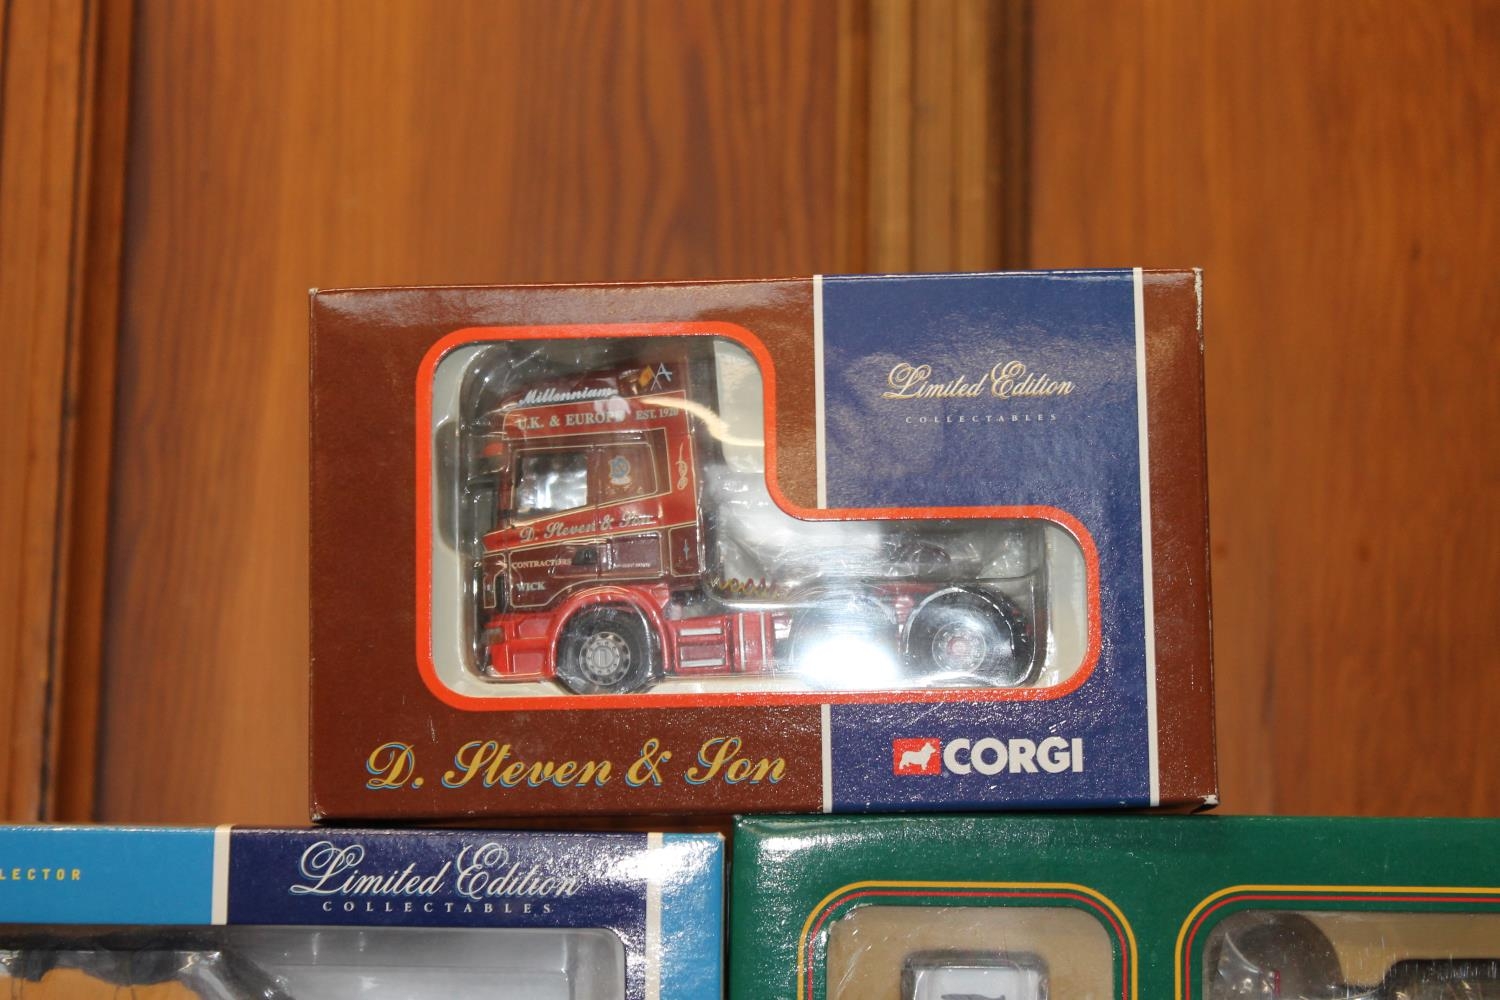 Corgi 1:50 scale diecast articulated lorry models including CC10601 Road Services Caledonian Ltd, - Image 4 of 4